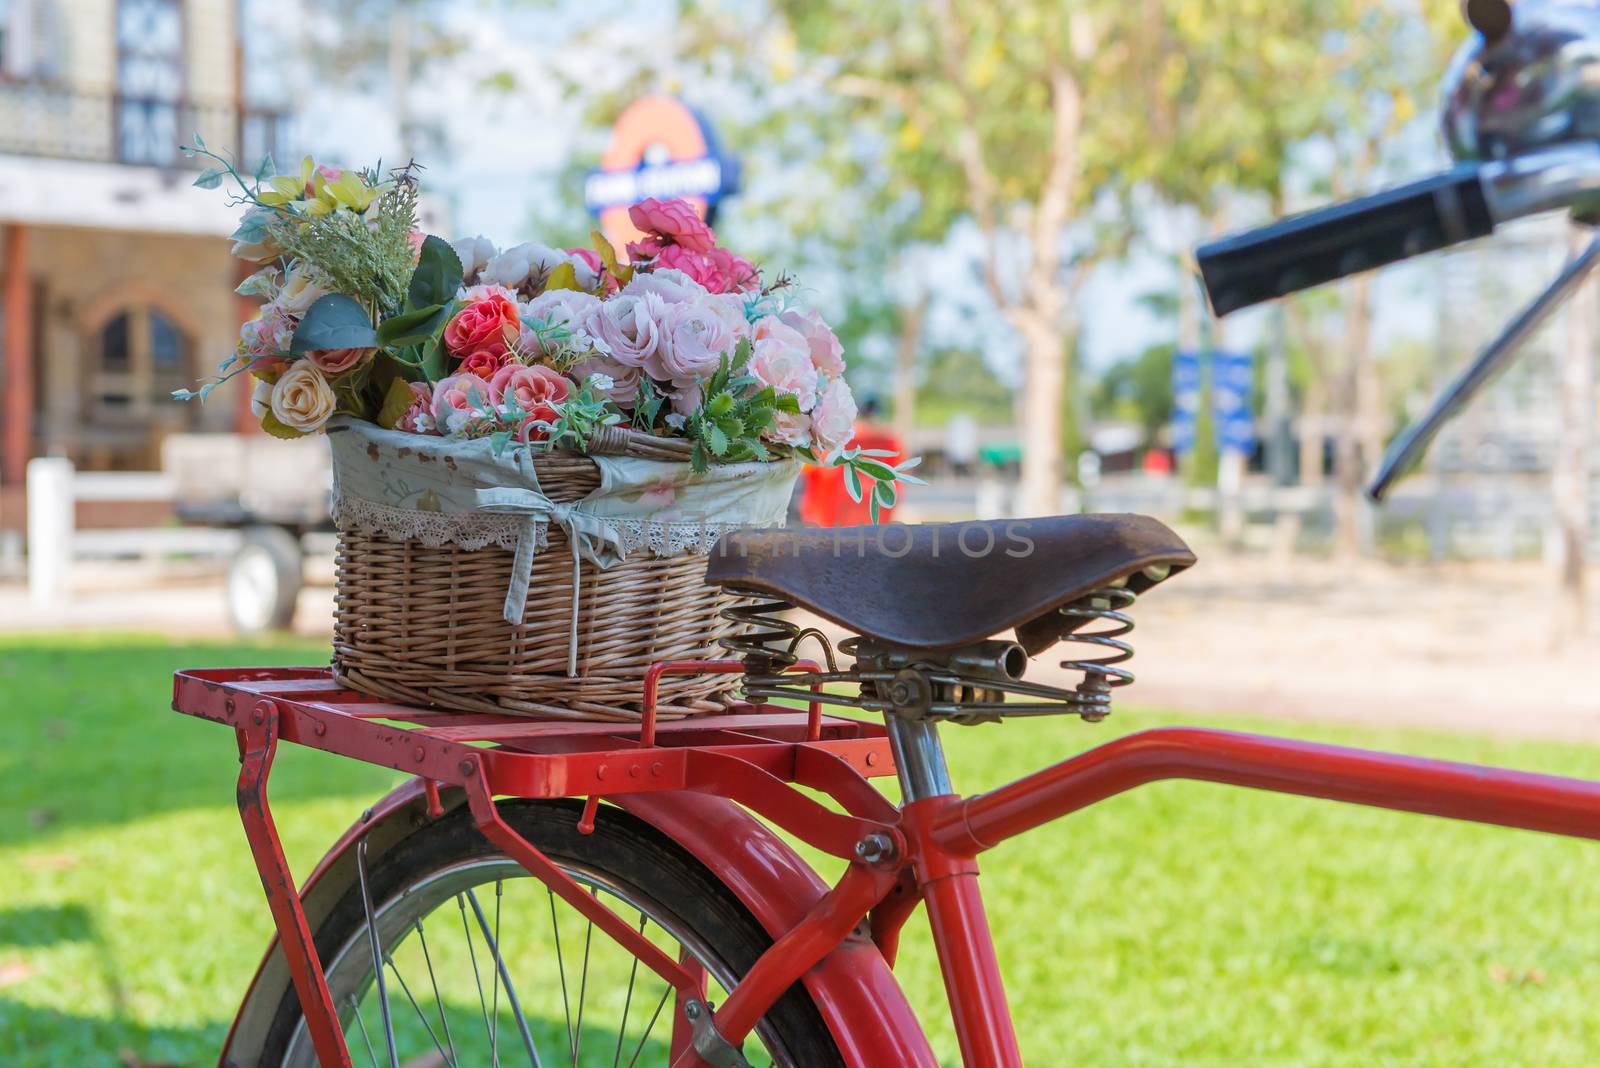 vintage bicycle equipped with basket of flowers in the garden.